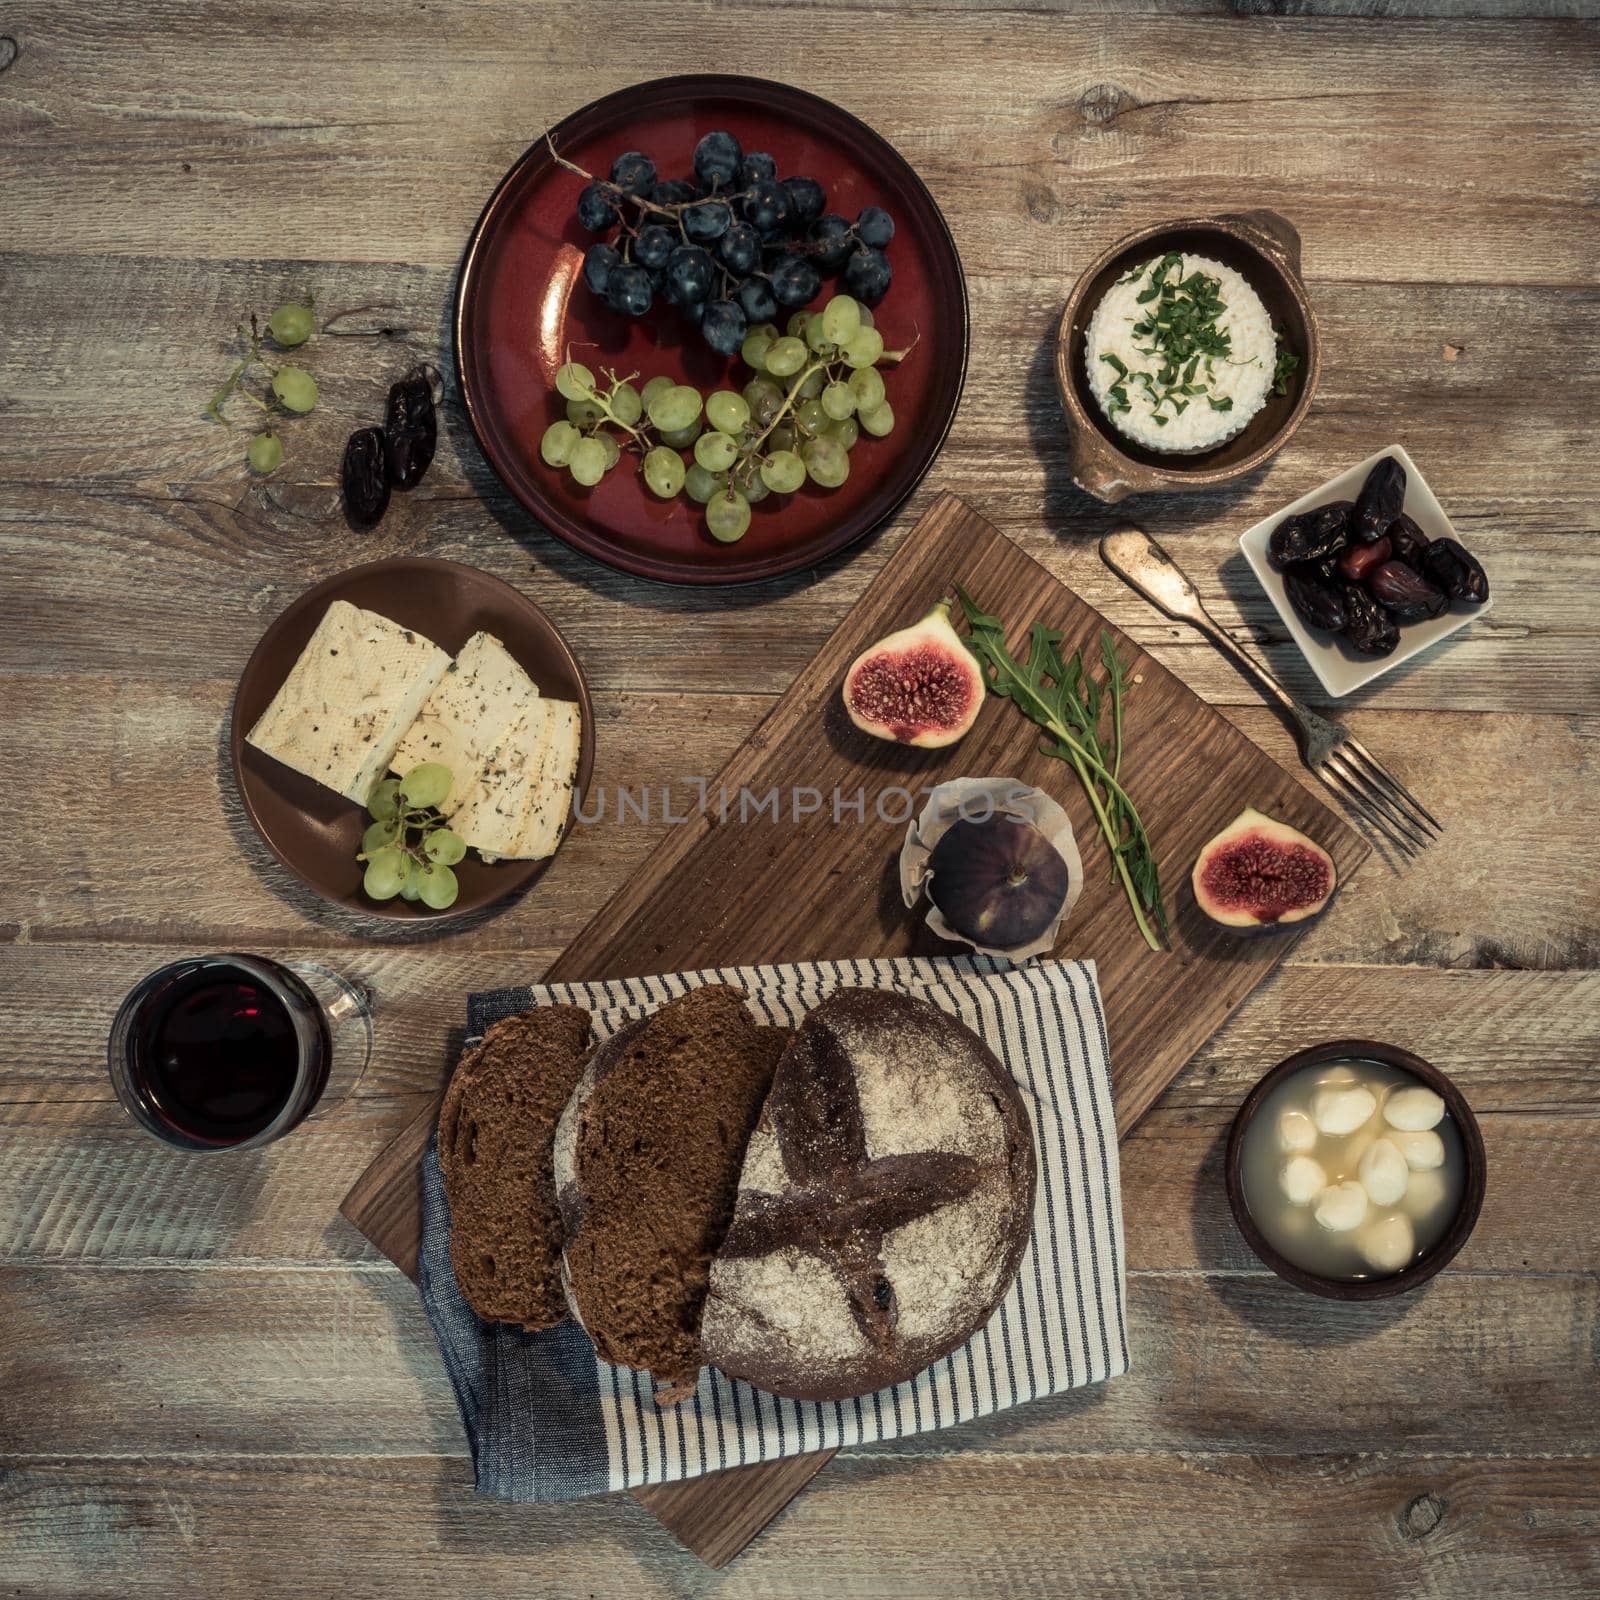 bread with cheeses and grapes on wooden background by tan4ikk1